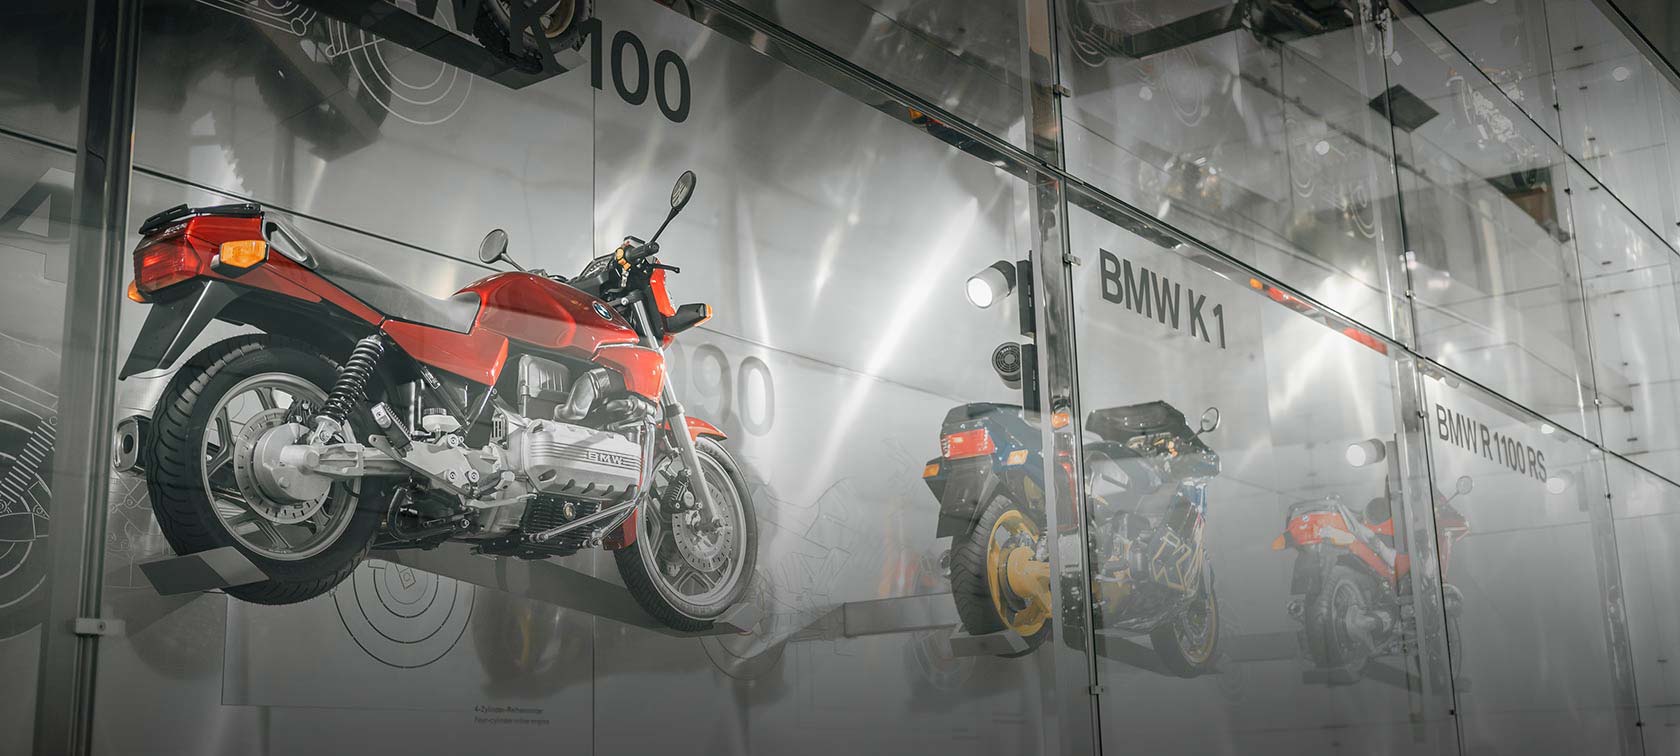 Wall installation of various BMW motorcycles like the BMW K 100 in red and the BMW K1 in blue as well as yellow in the BMW Museum